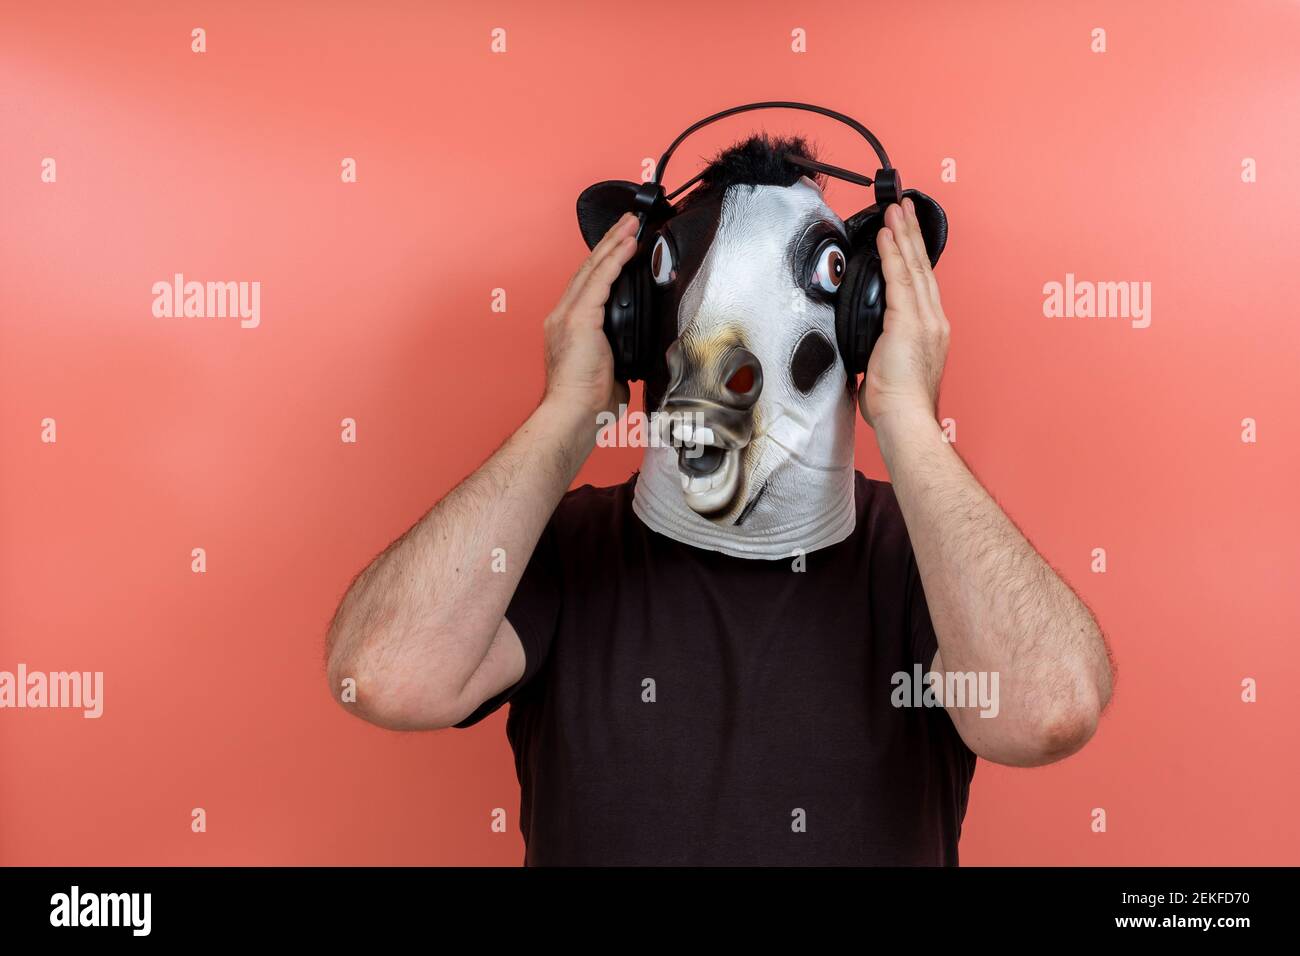 costumed person wearing a cow mask listening music with headphones with a pink background Stock Photo